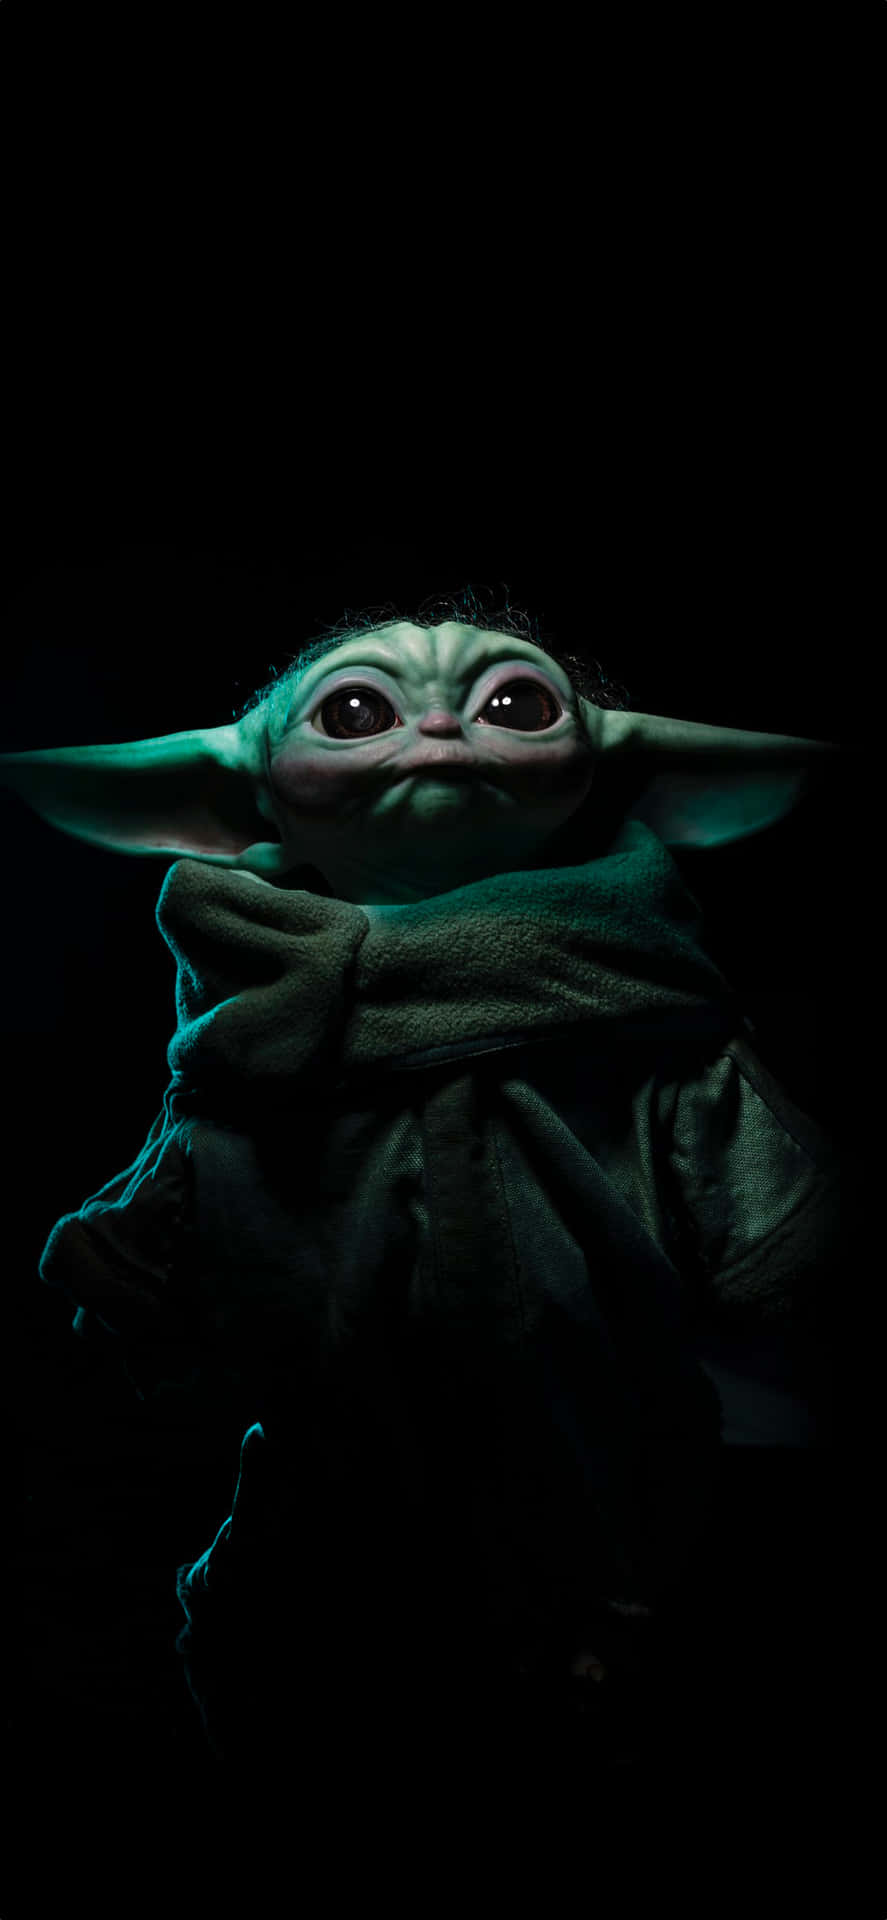 Show your friends you're the biggest fan of Baby Yoda with this cool iPhone wallpaper Wallpaper